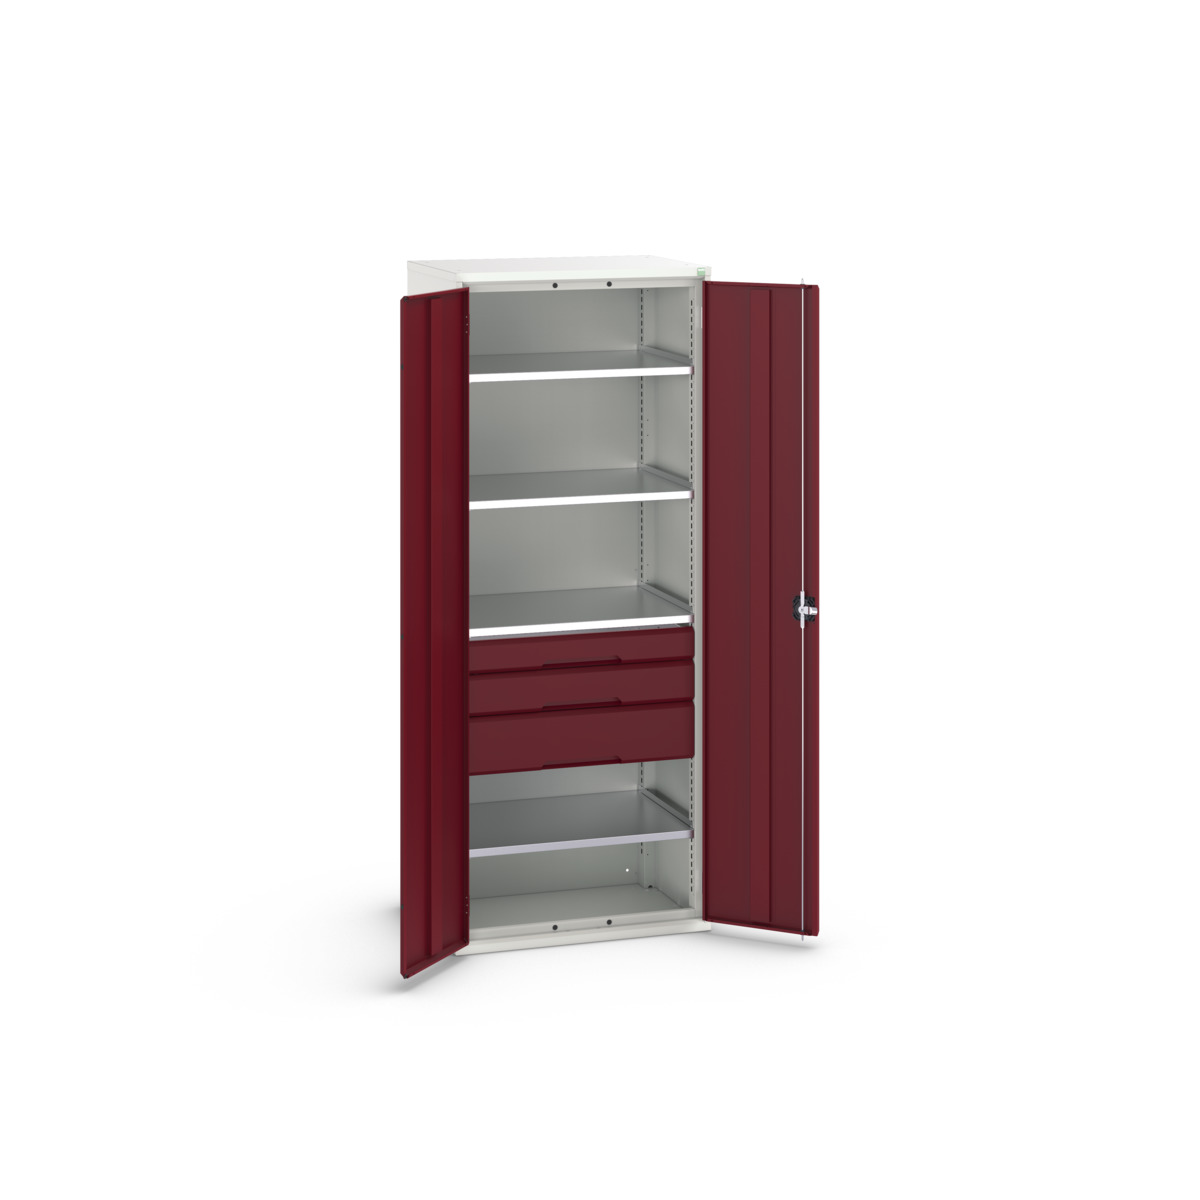 16926456.24 - verso kitted cupboard